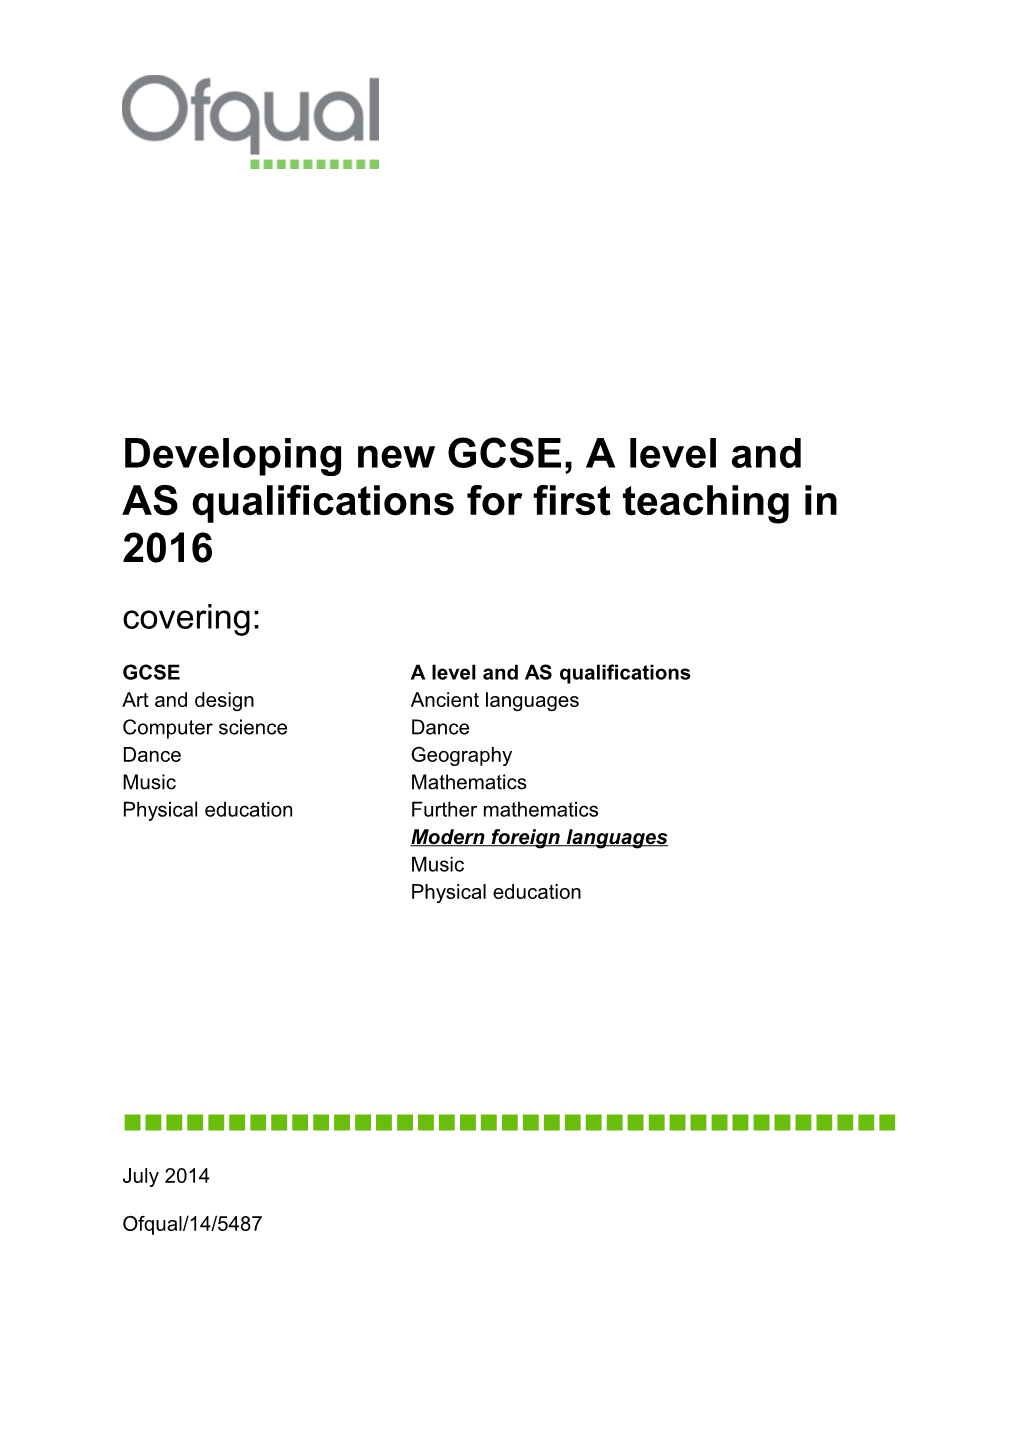 Developing New GCSE, Alevel and Asqualifications for First Teaching in 2016